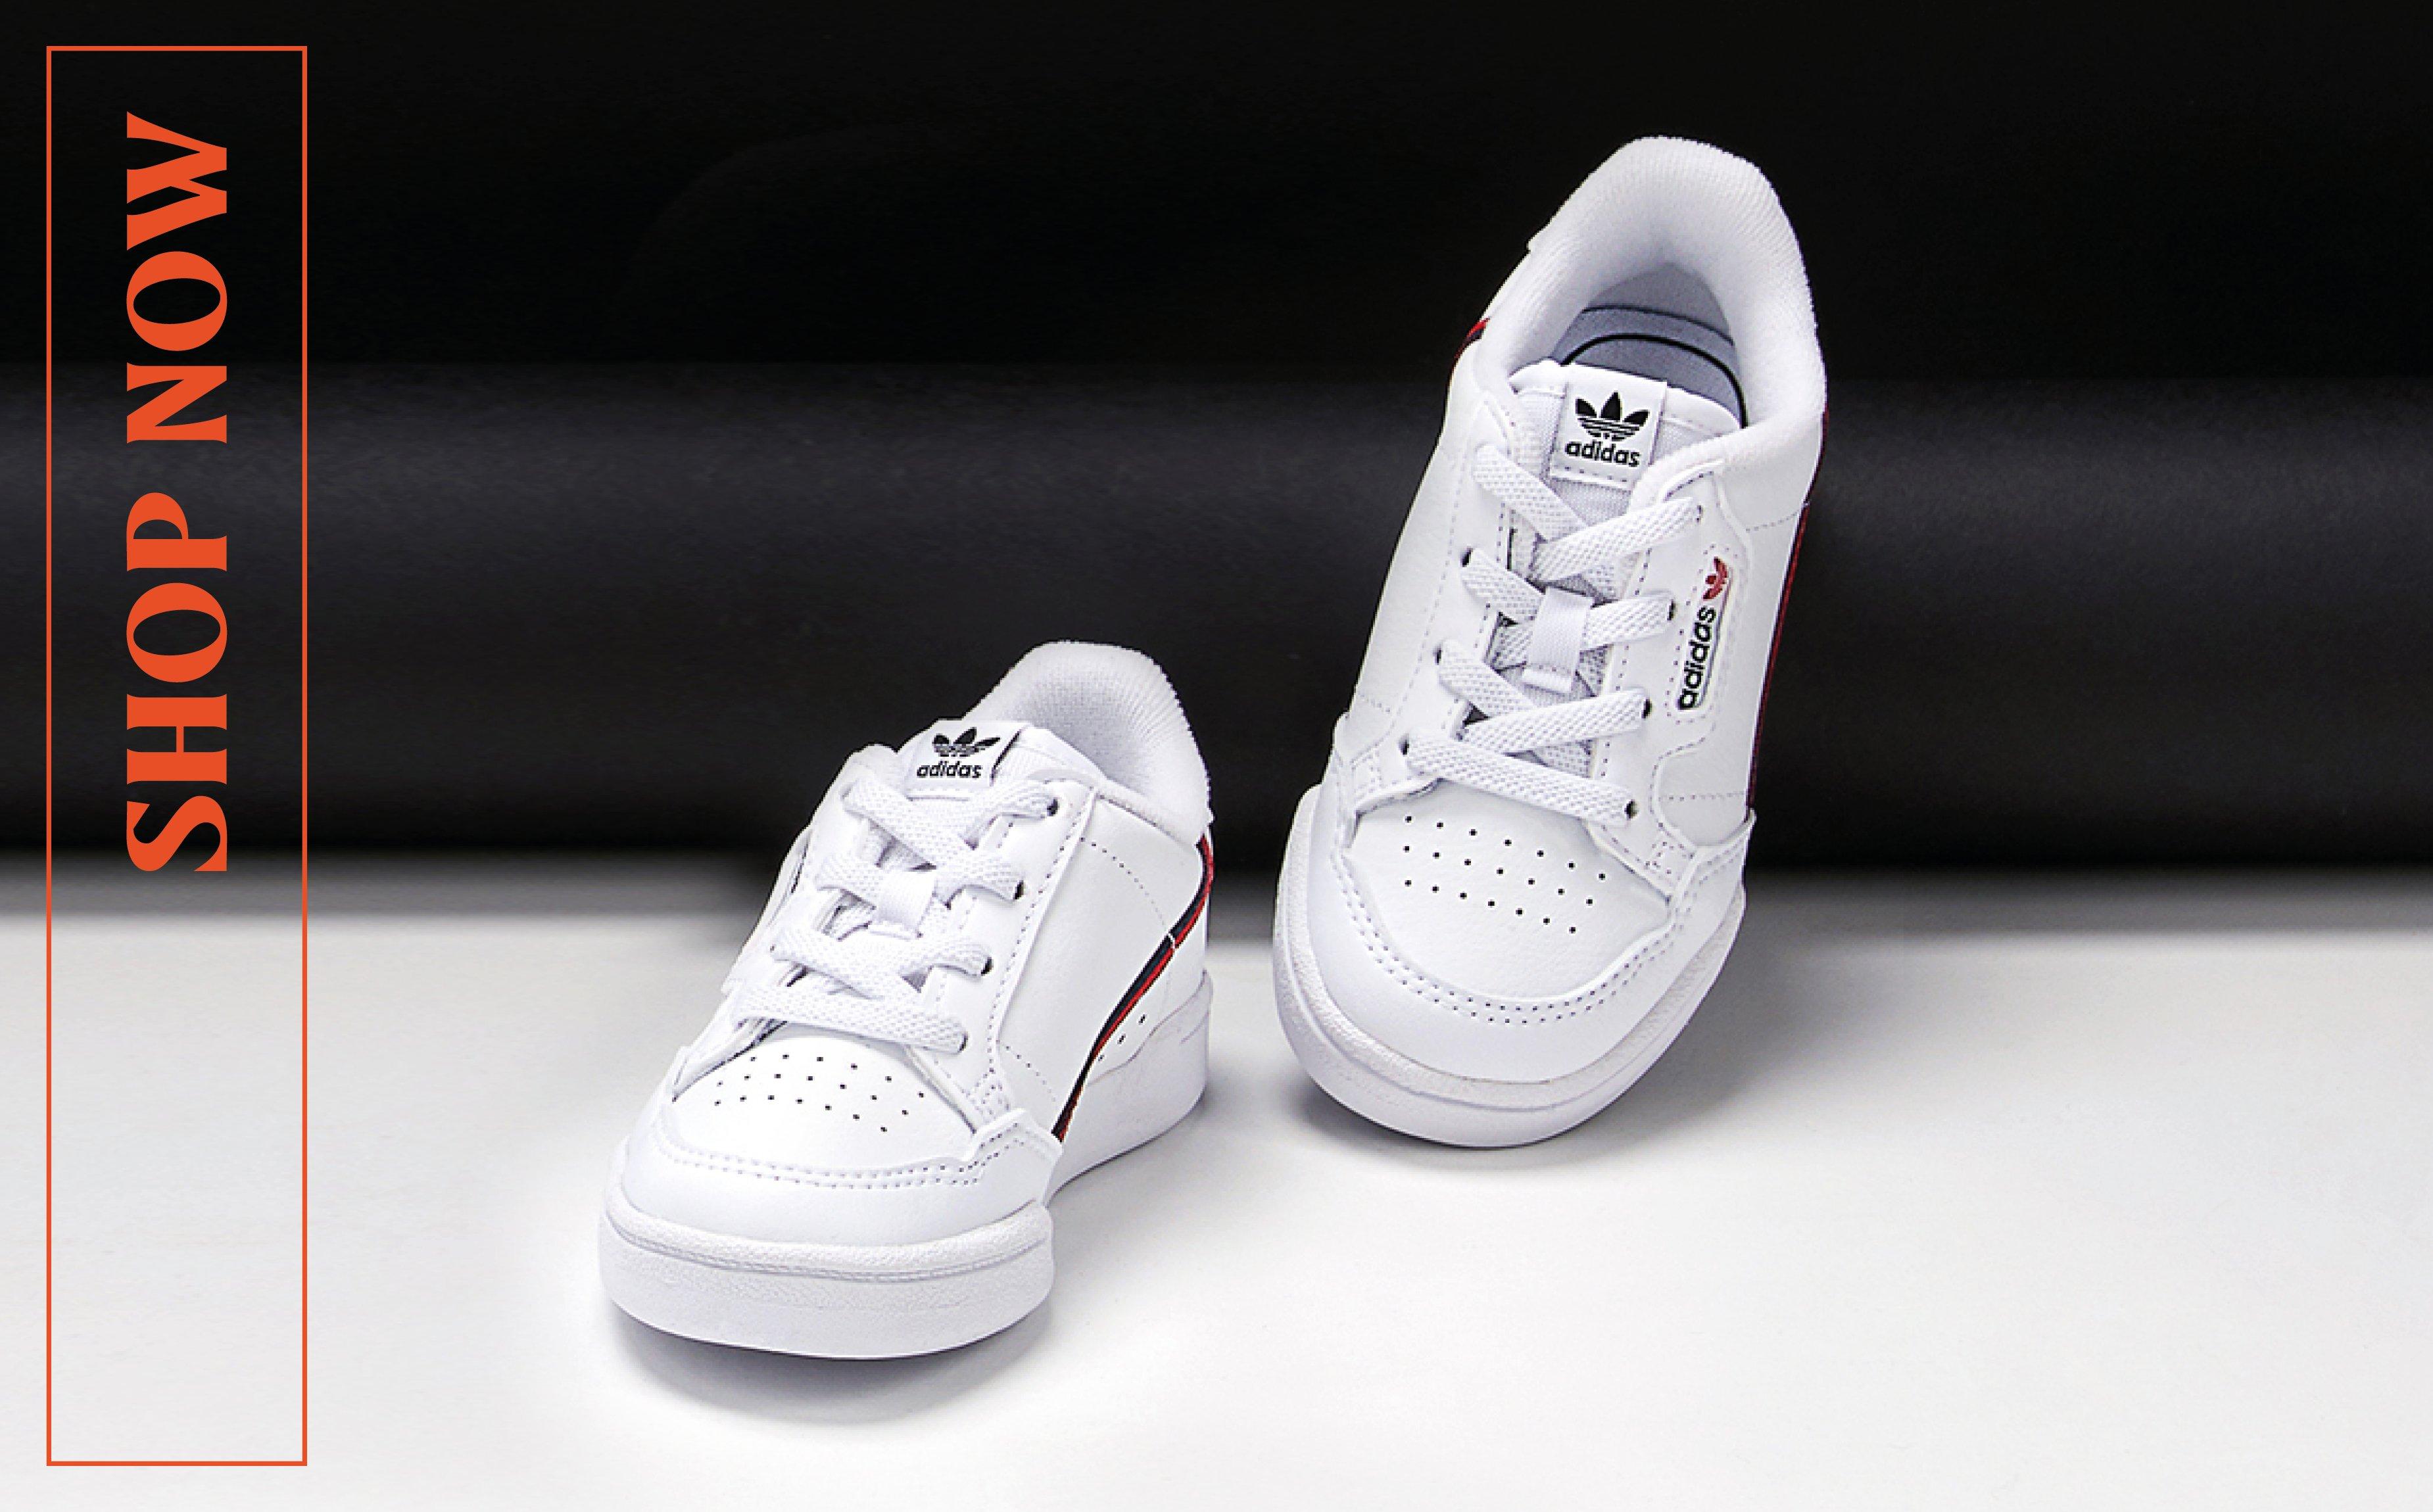 truworths sneakers for ladies